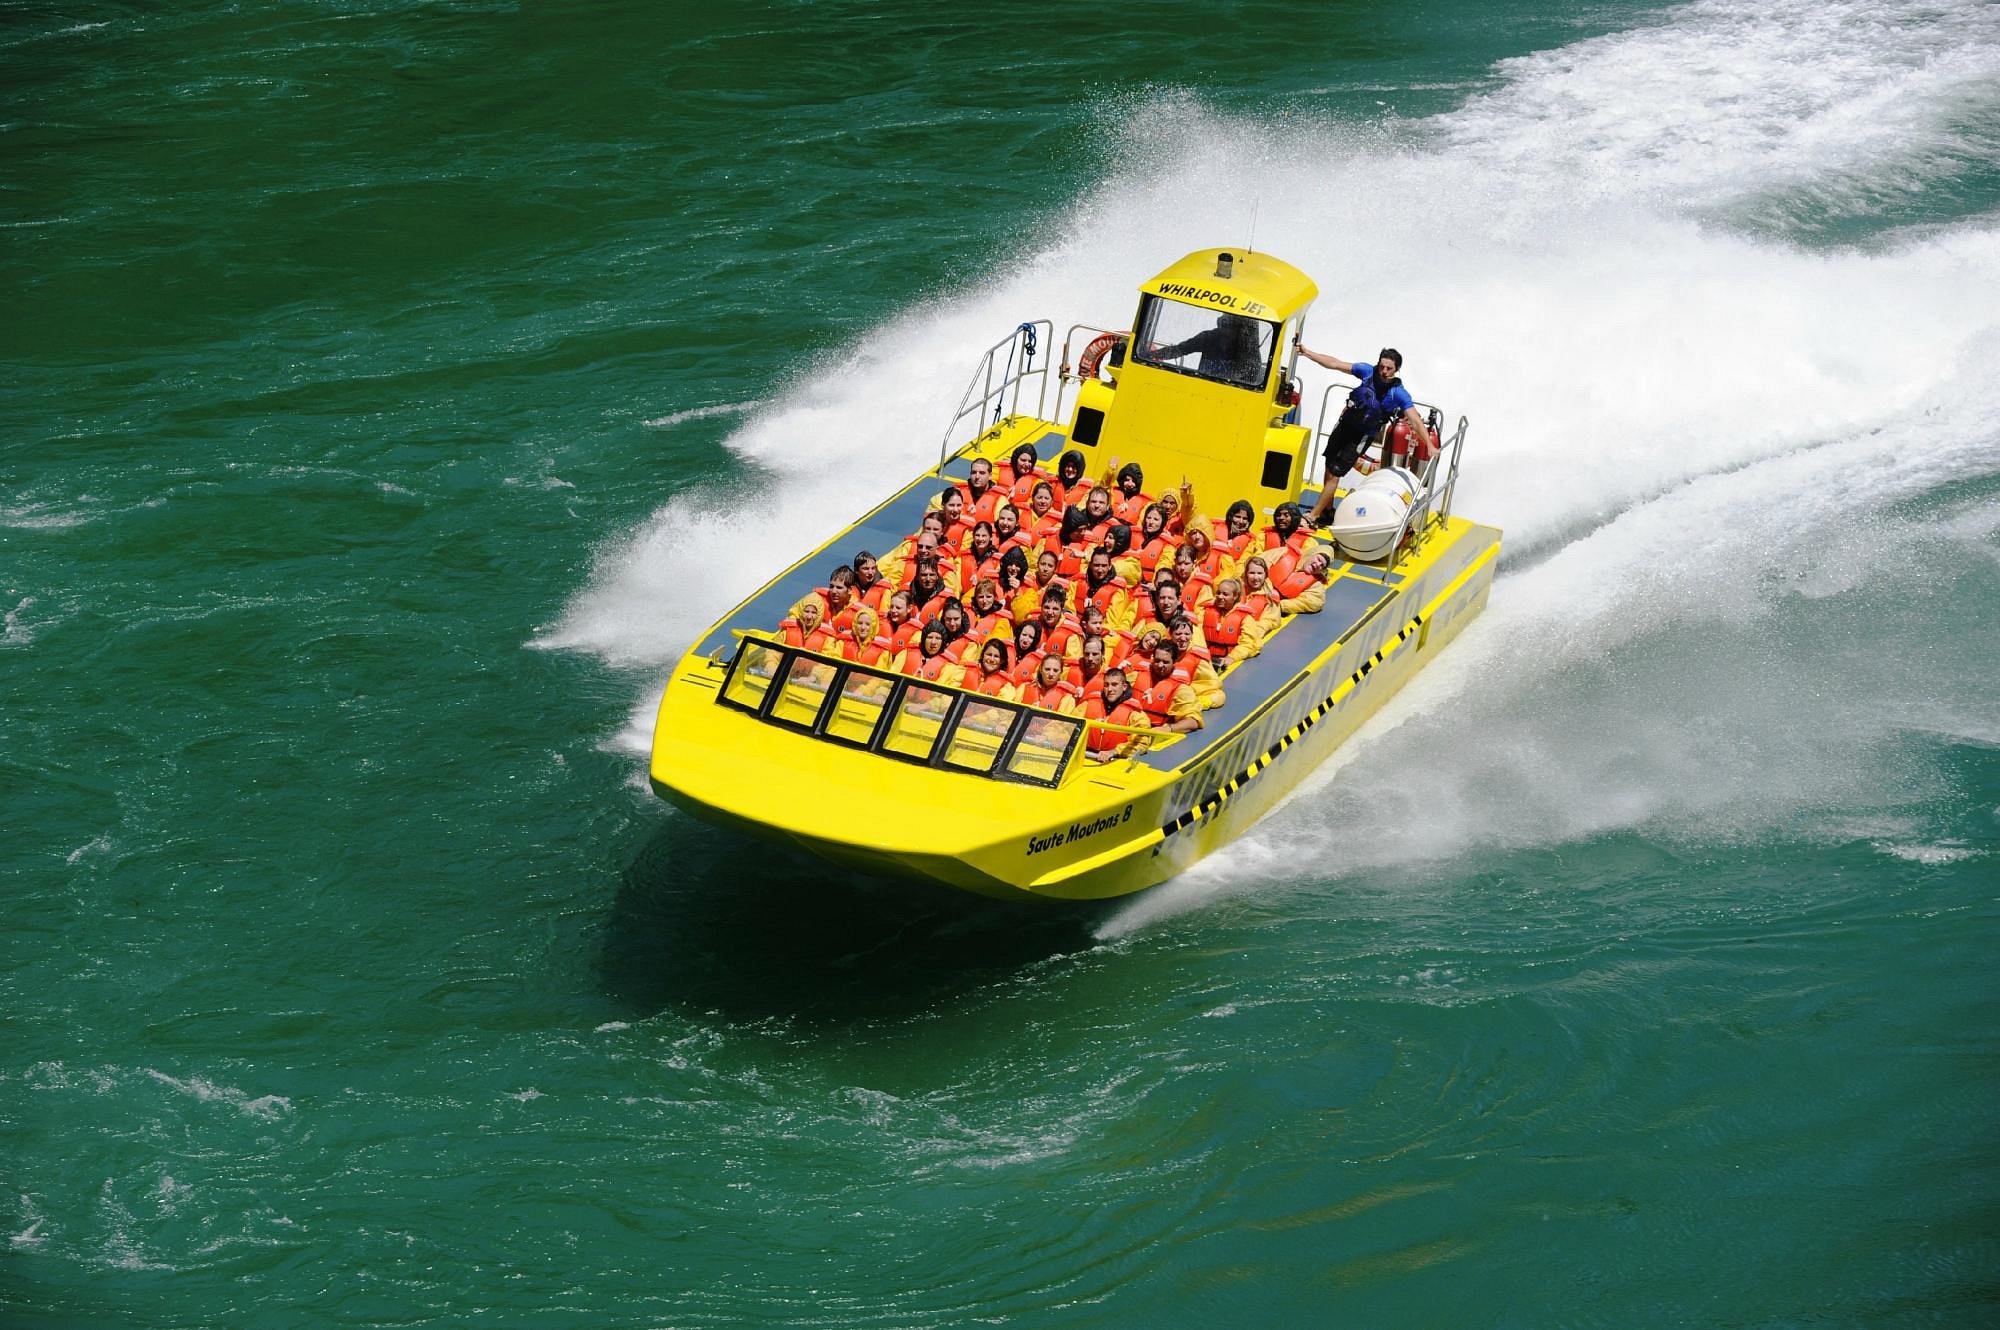 whirlpool jet boat tour accidents